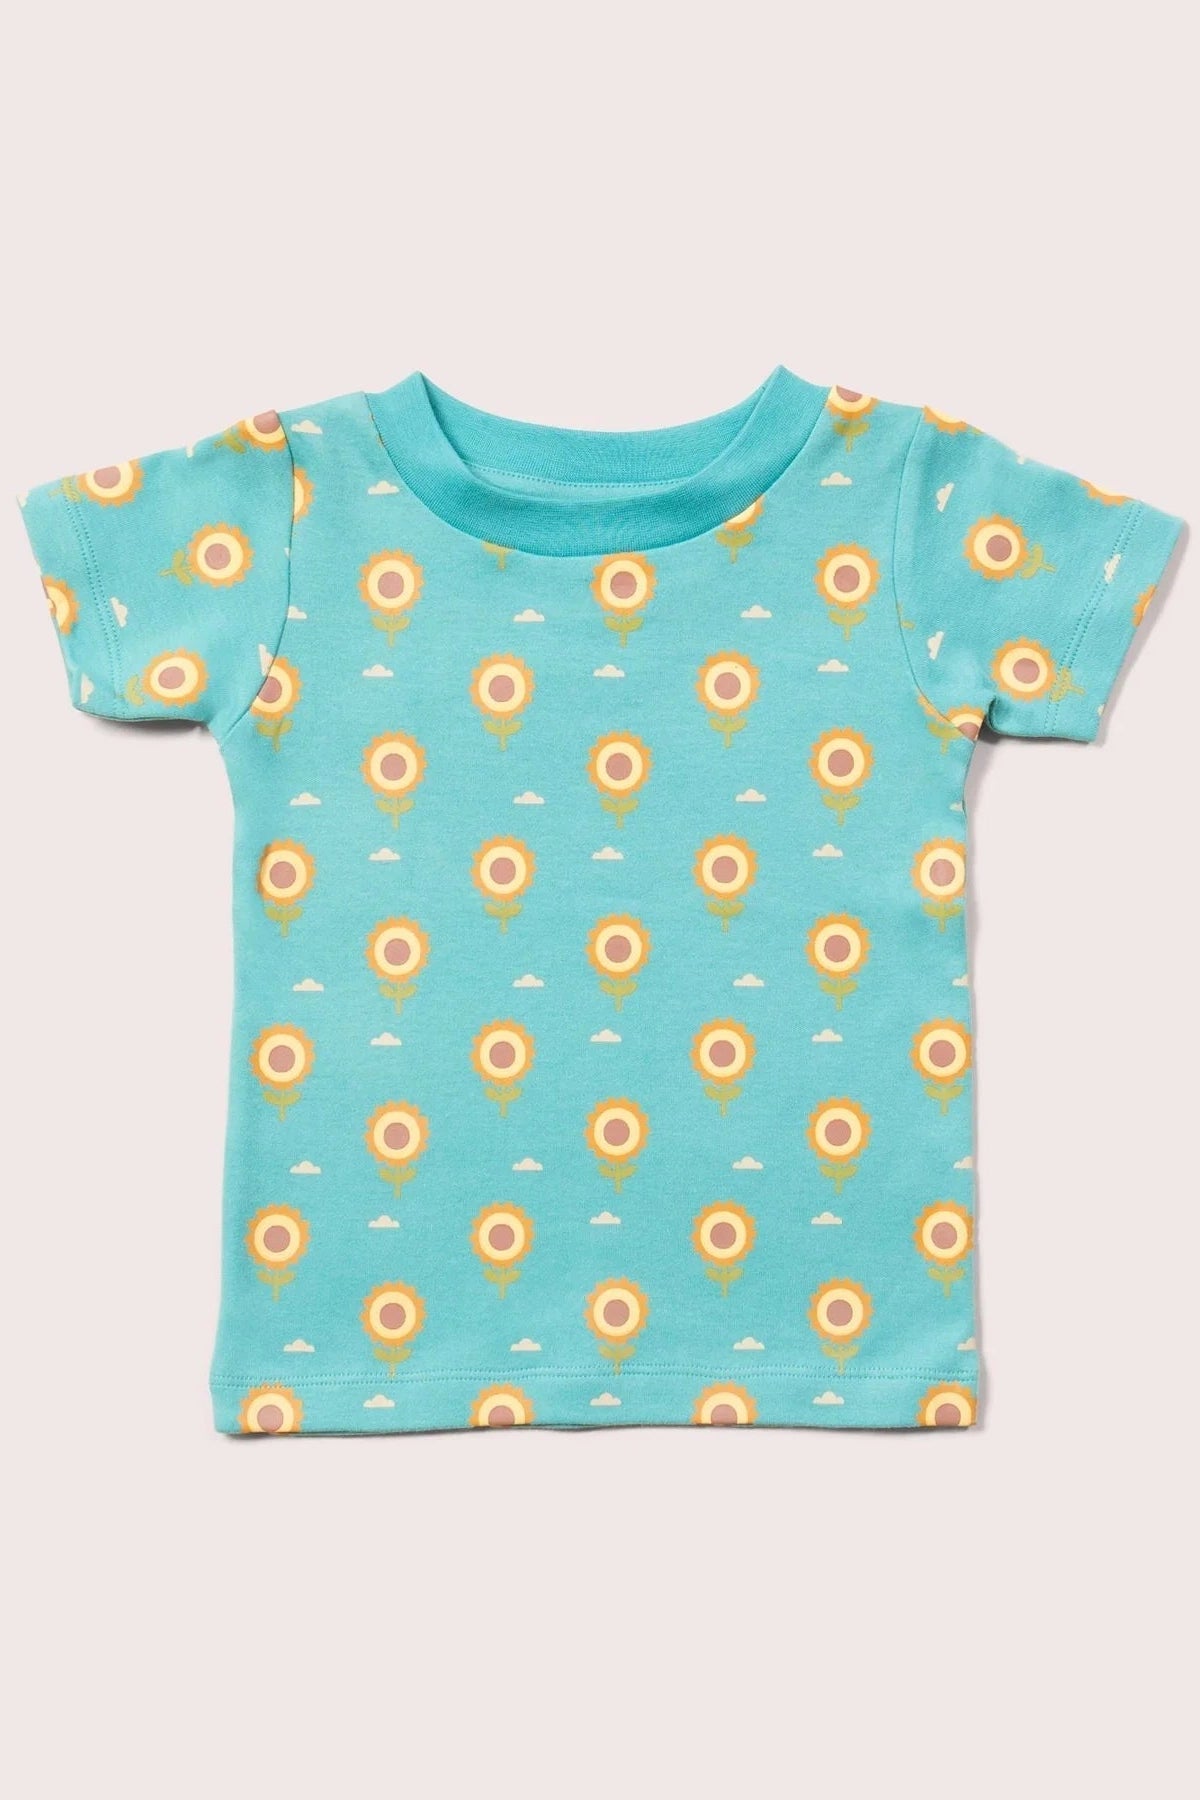 Little Green Radicals Sunflower Short Sleeve T-Shirt - Sunflowers Repeat Print-Kids-Ohh! By Gum - Shop Sustainable